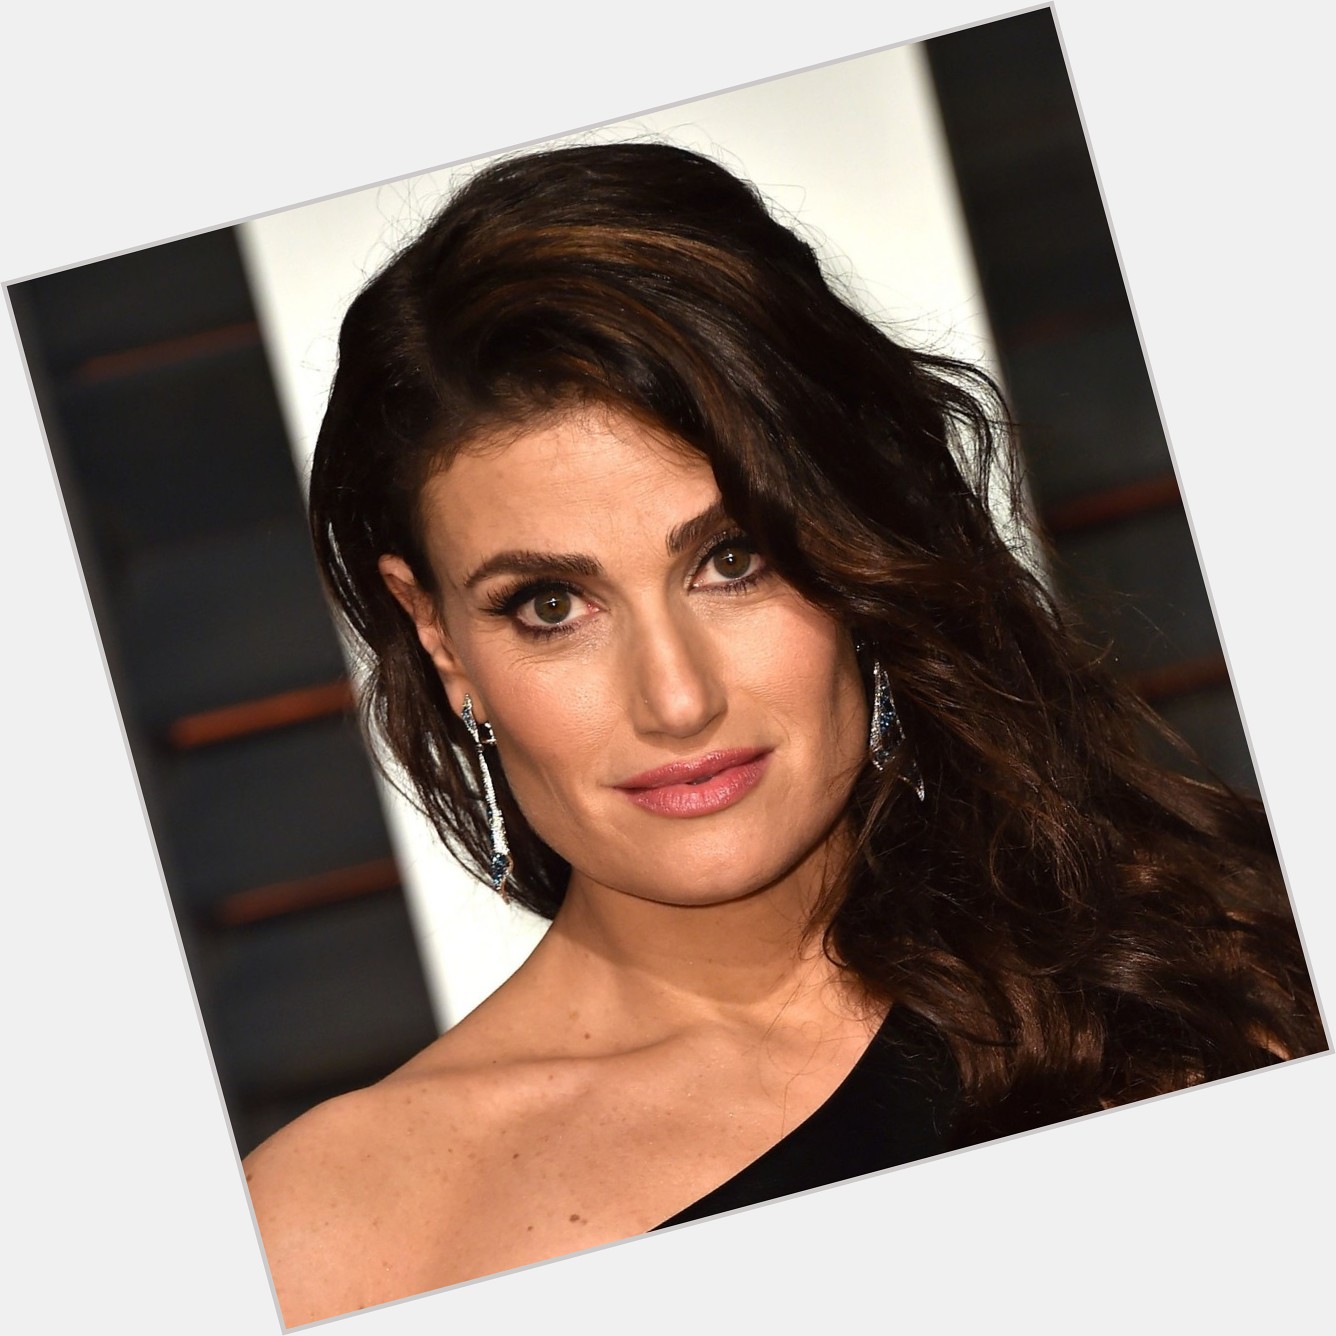 Wishing this living legend a Happy Birthday! From Rent to Frozen 2, there is only one Idina Menzel. 